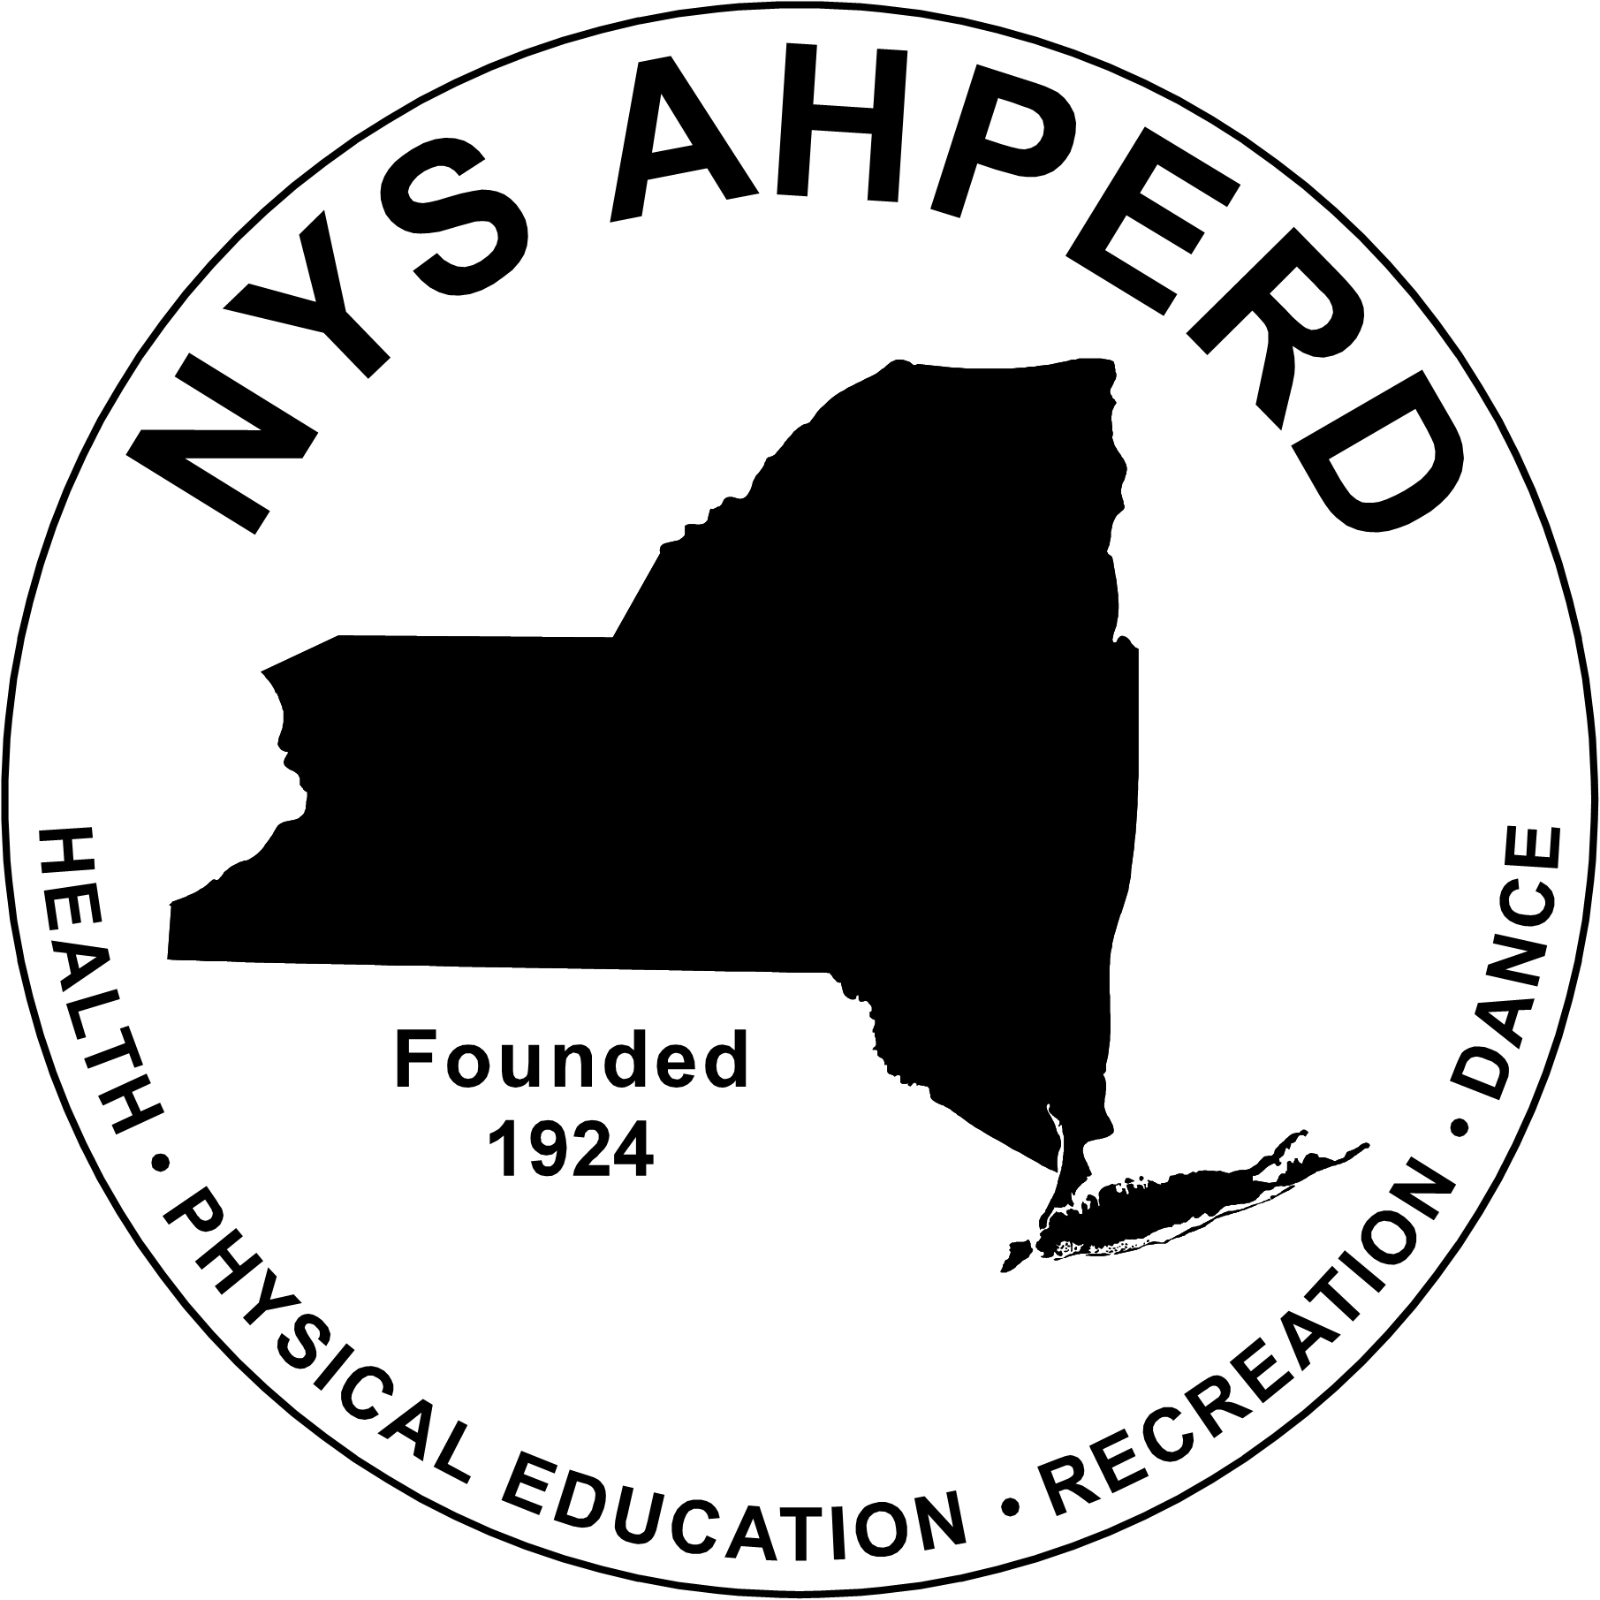 NYS%20AHPERD%20Logo%20Black%20and%20White.png